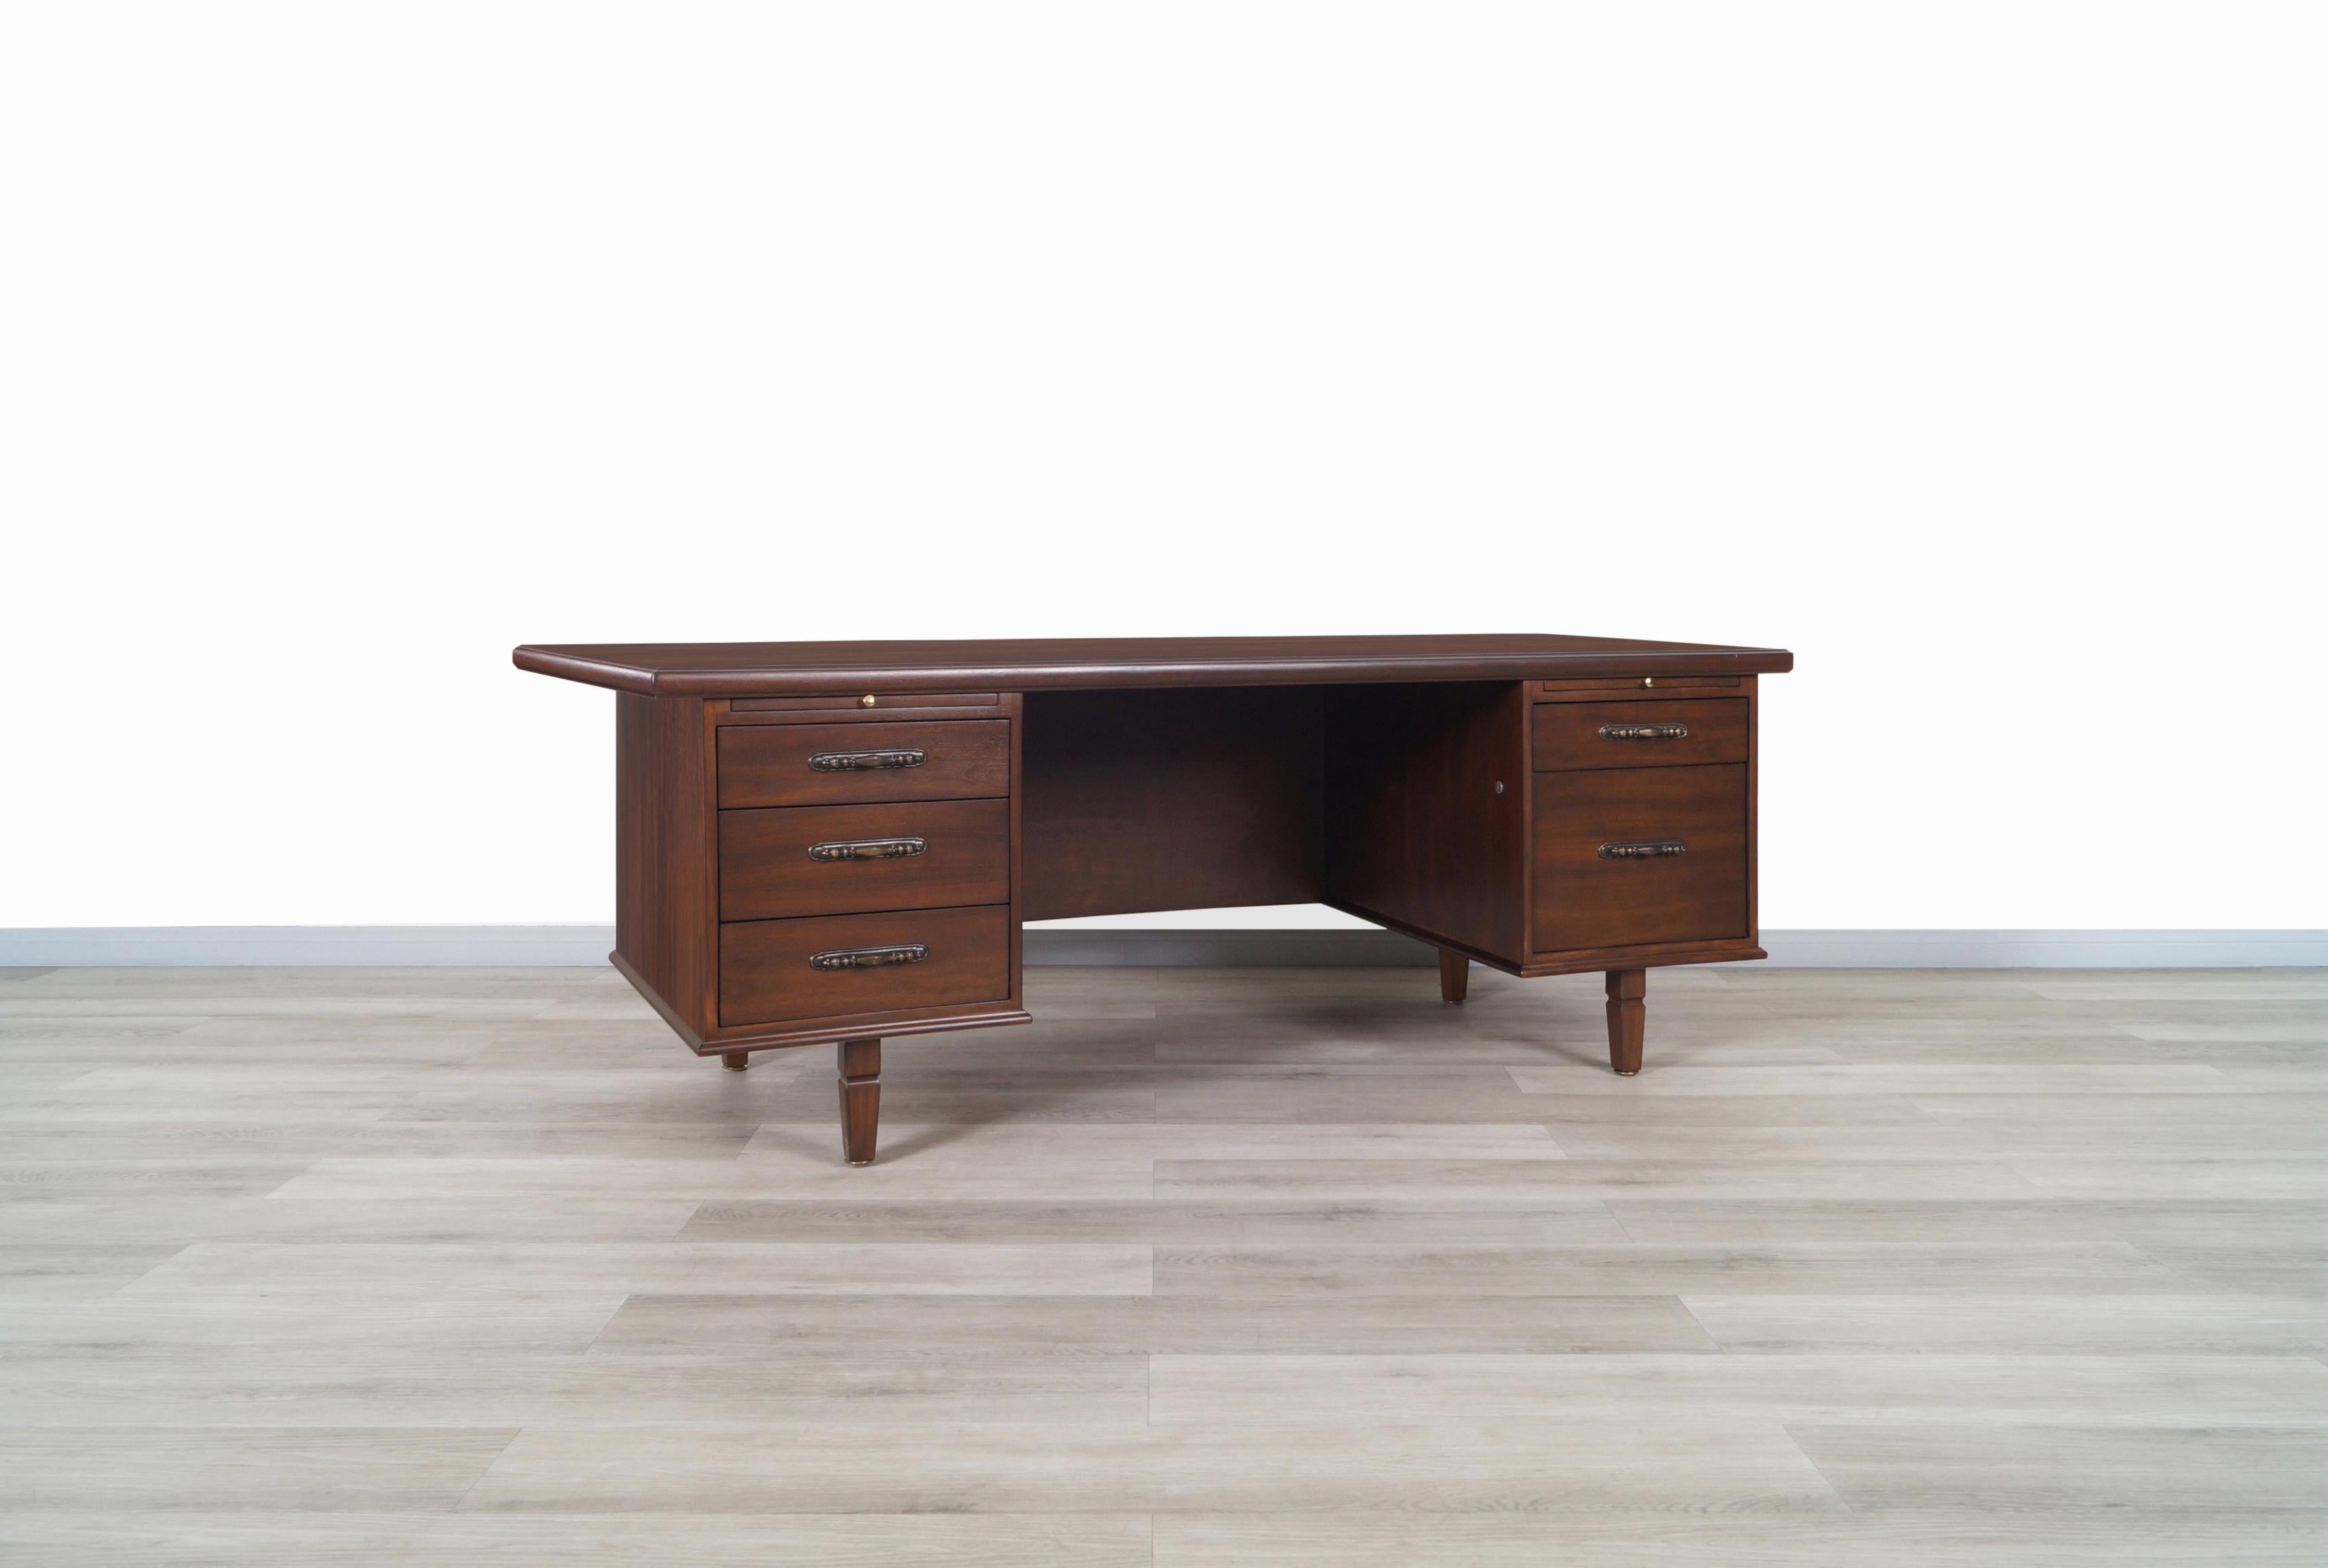 Monumental vintage executive walnut desk designer by Maurice Bailey for Monteverdi Young in United States, circa 1960s. This desk has an innovative design where the peculiar shape of the edges of the top stands out. Features four drawers and a file